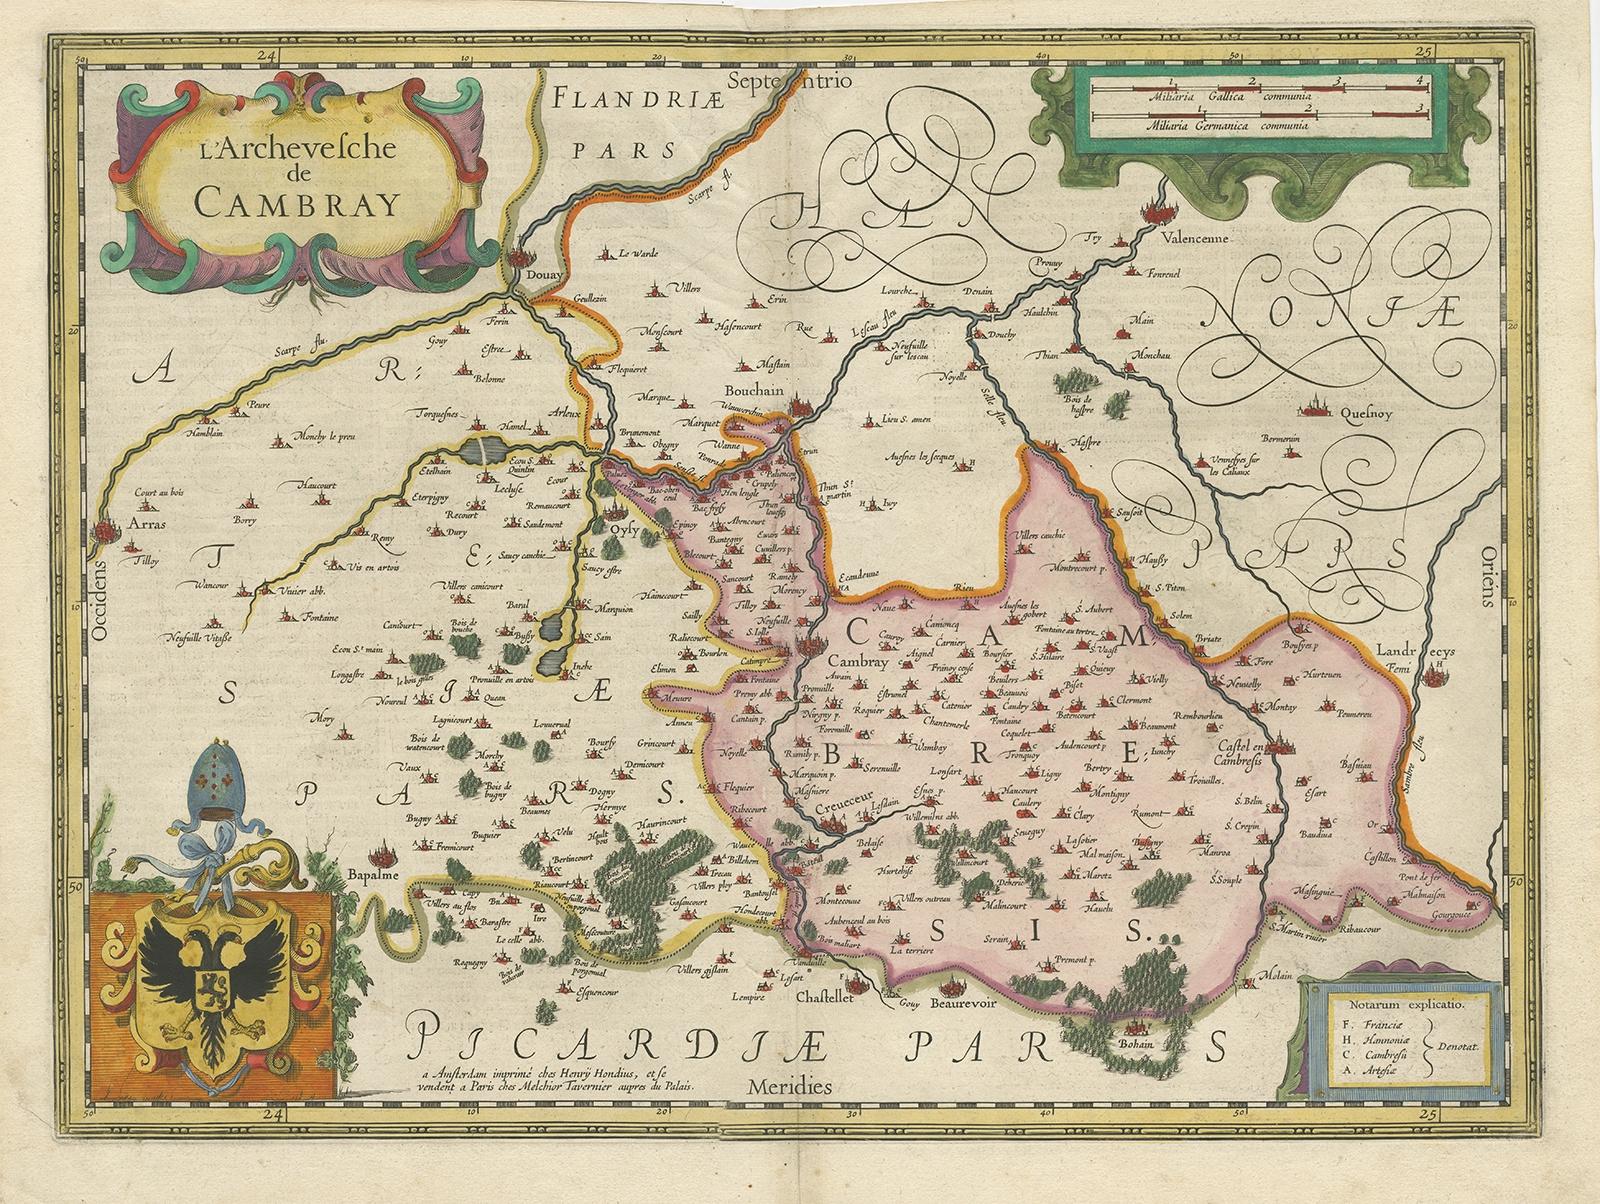 Antique map titled 'l'Archevesche de Cambray'. Decorative map of the region of Cambrai, France. Includes the cities of Cambrai, Valencienes, Douai, and Bouchain. 

Artists and Engravers: Henricus Hondius (1597-1651) was one of the famous Dutch